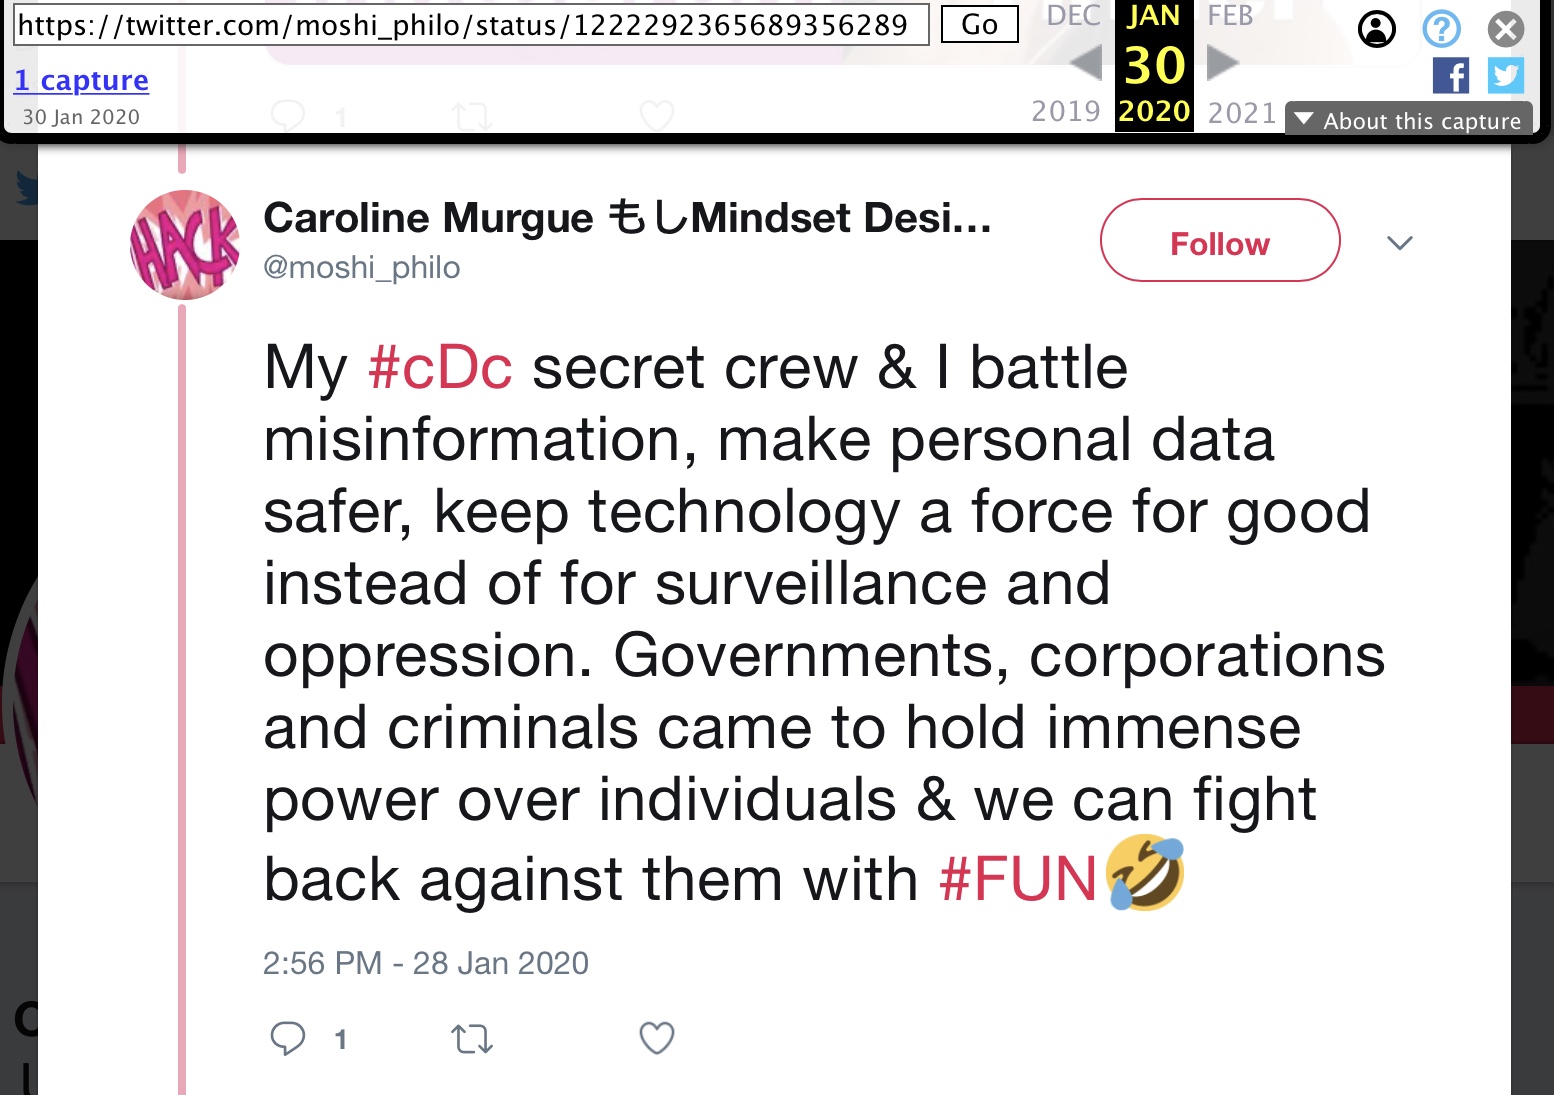 28 Jan 2020 tweet from @moshi_philo: My #cDc secret crew & I battle misinformation, make personal data safer, keep technology a force for good instead of for surveillance and oppression. Governments, corporations and criminals came to hold immense power over individuals & we can fight back against them with #FUN